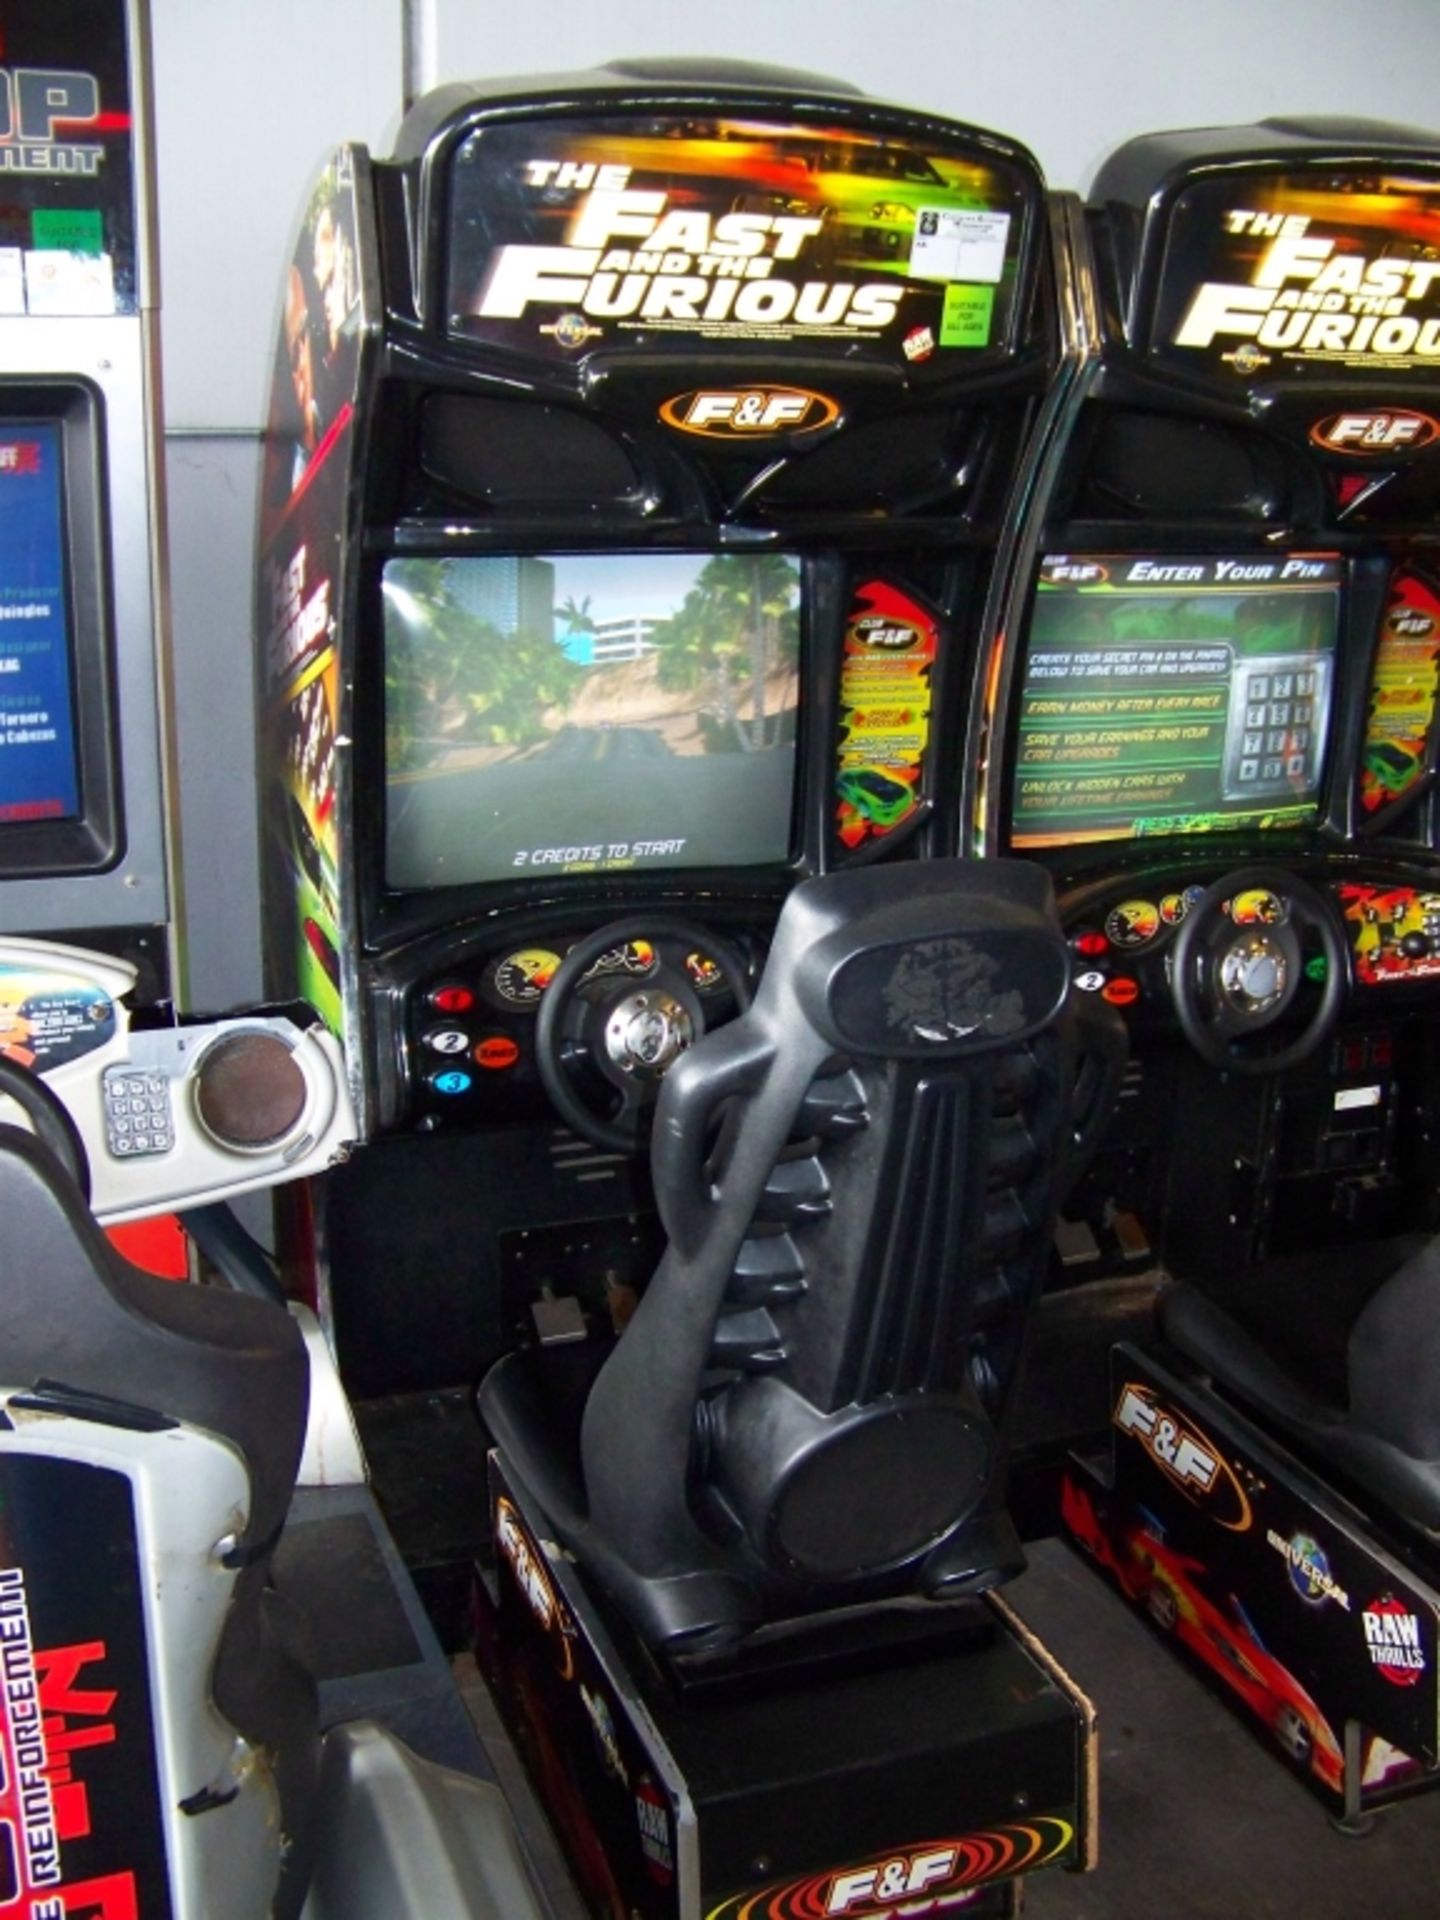 FAST AND FURIOUS RACING ARCADE GAME MR